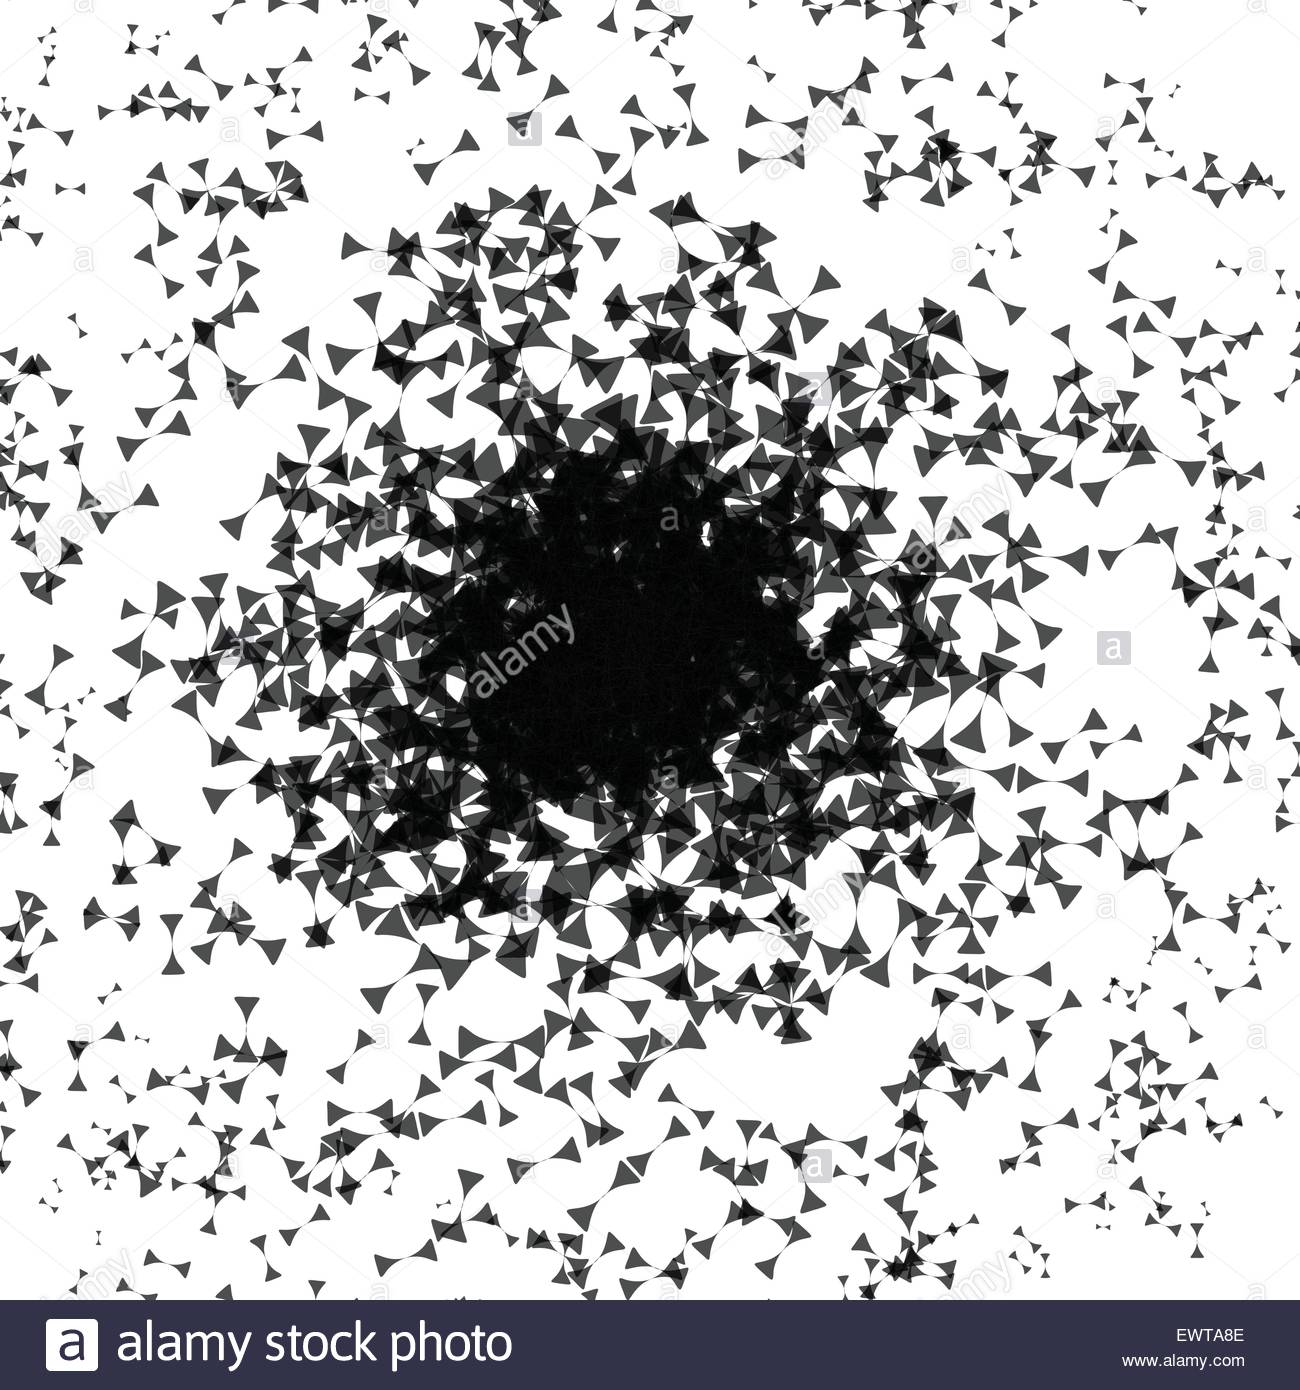 Abstract Background Made Of Scattered Shapes Black And White